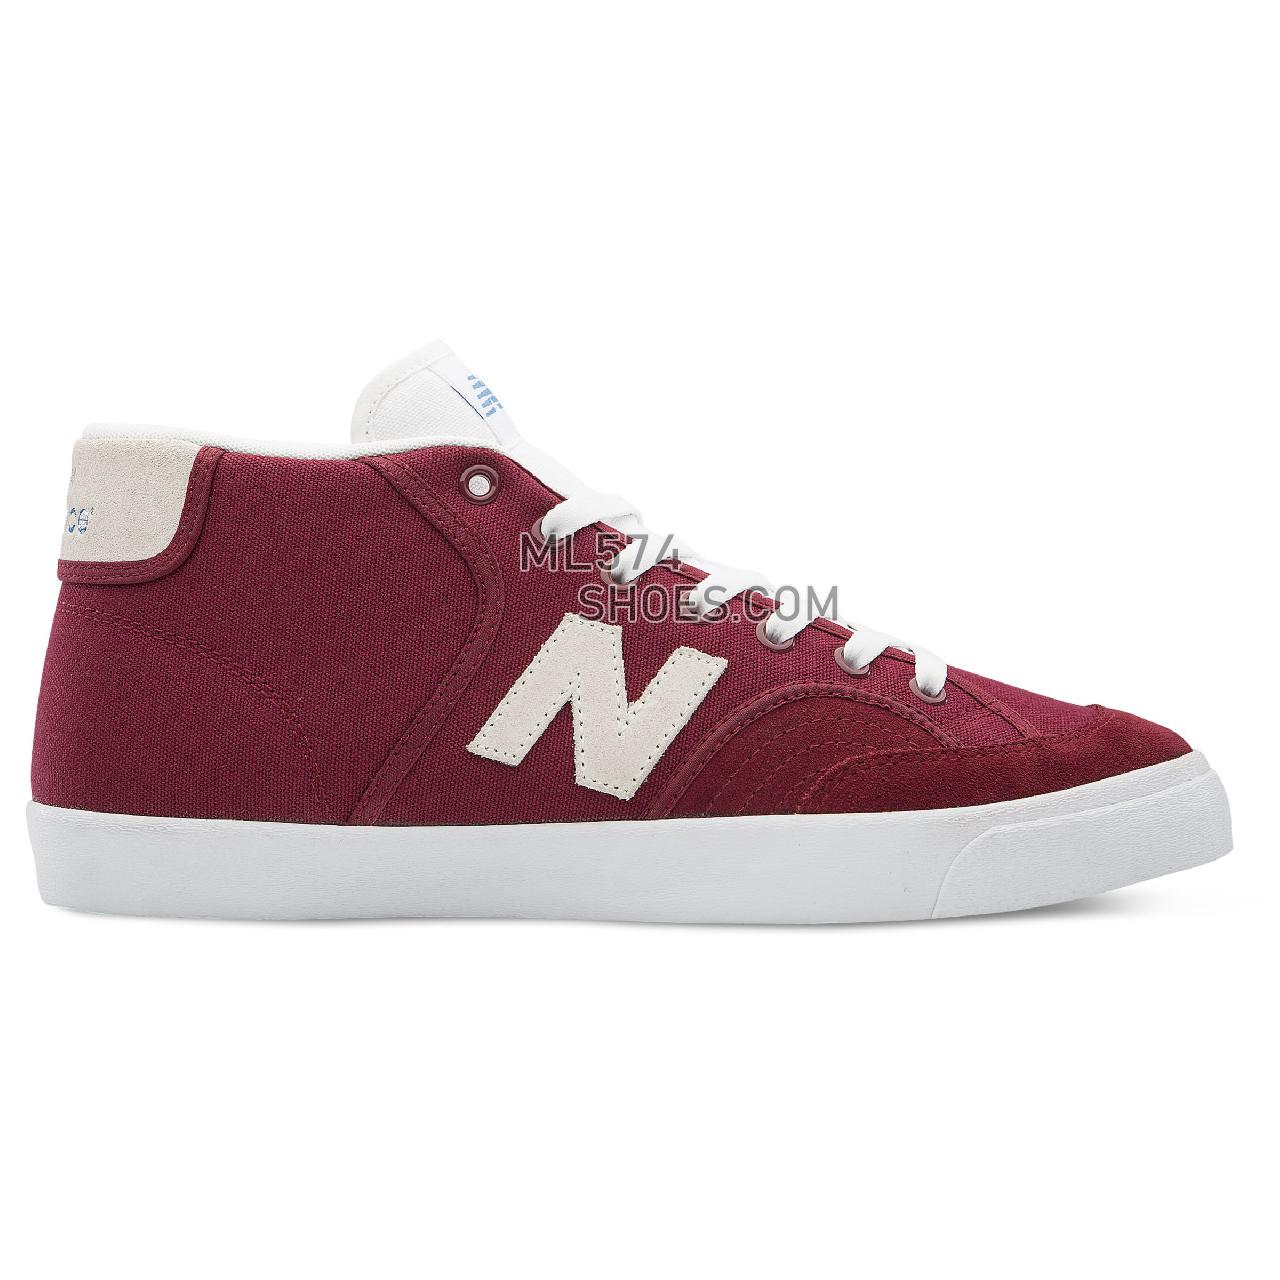 New Balance Pro Court 213 - Men's 213 - Classic Burgundy with White - NM213GGB